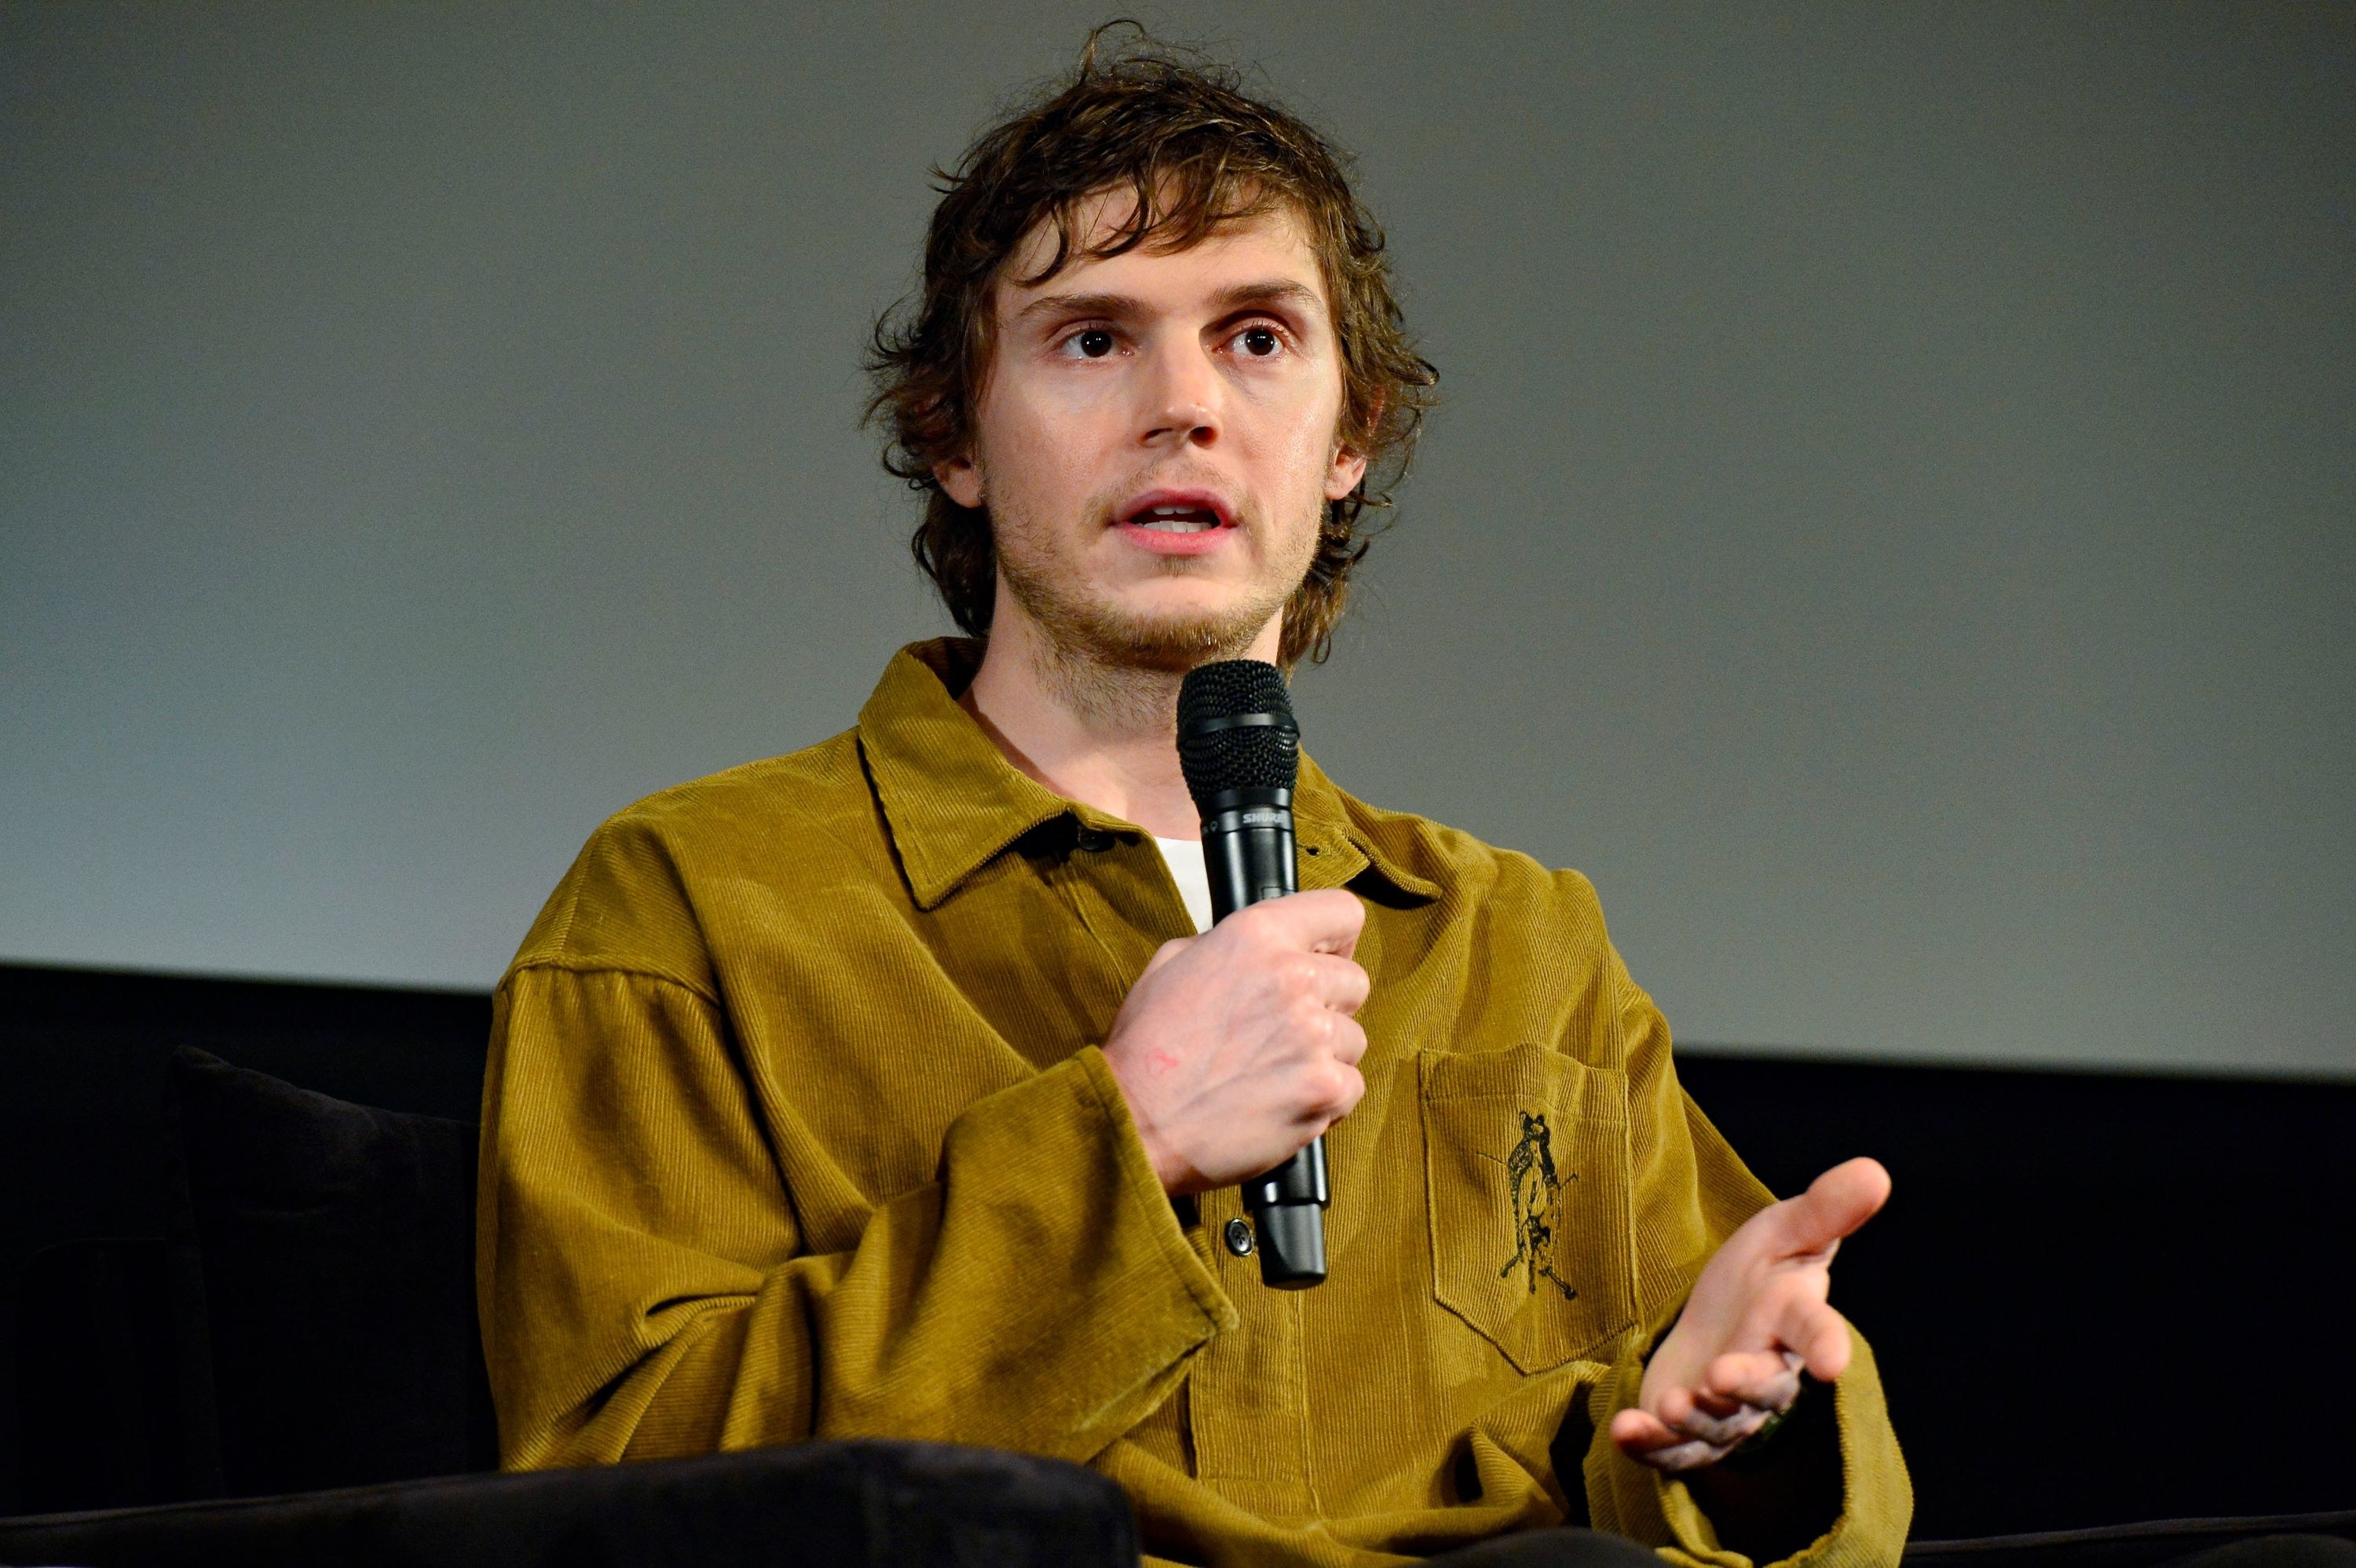 Evan speaking during the panel discussion